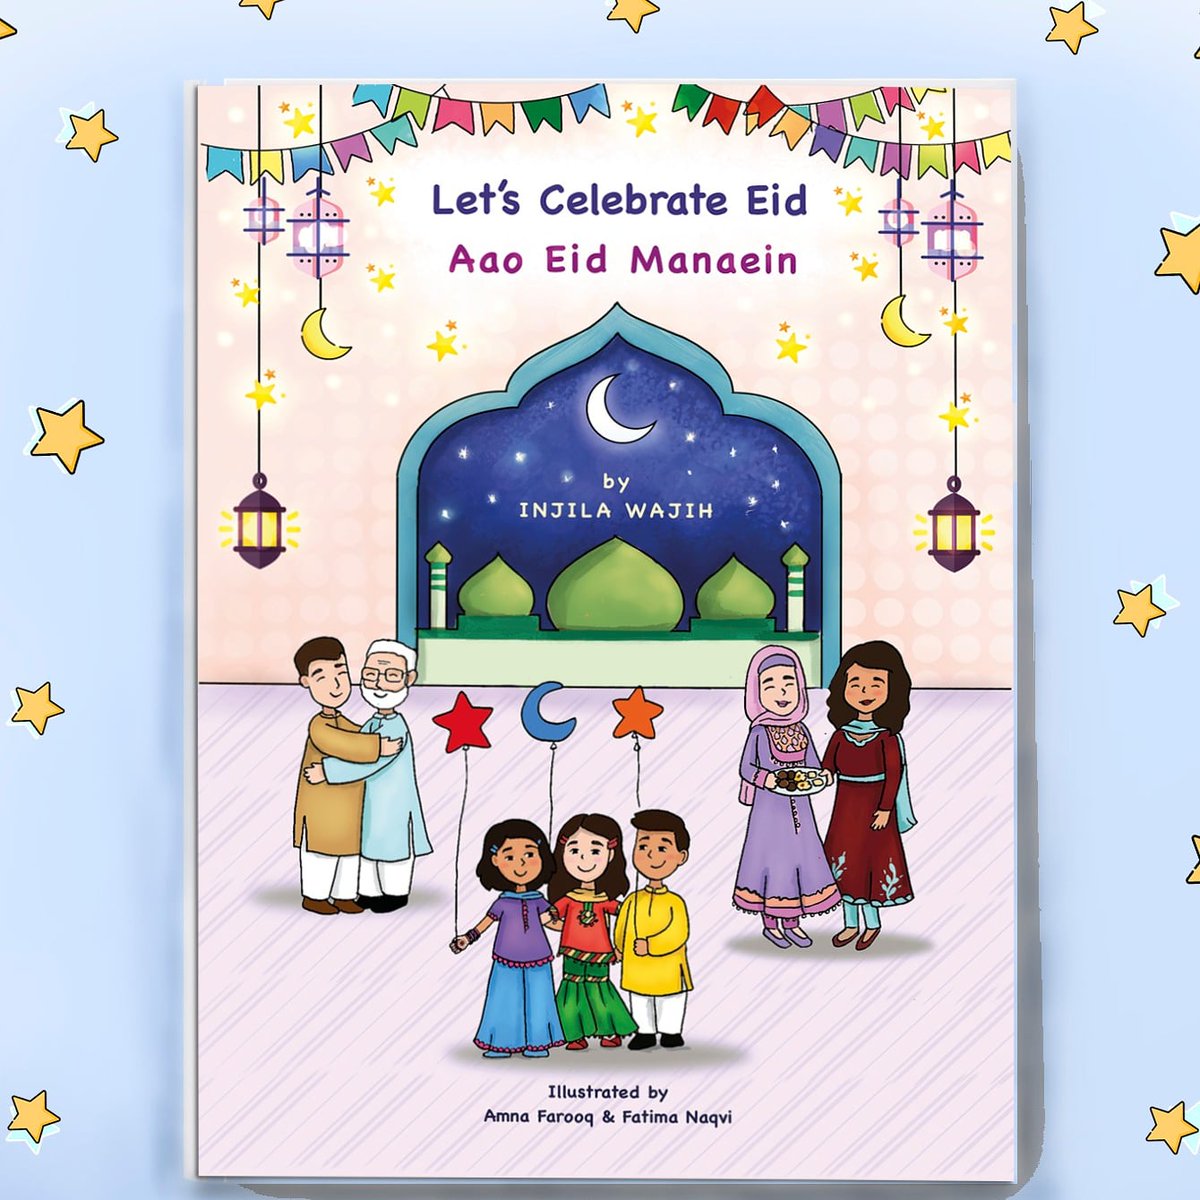 Alhumdulilah finished another book project.
Did Illustrations and book design for this beautiful Eid story. 

#muslimillustrator 
#muslimchildrensbooks